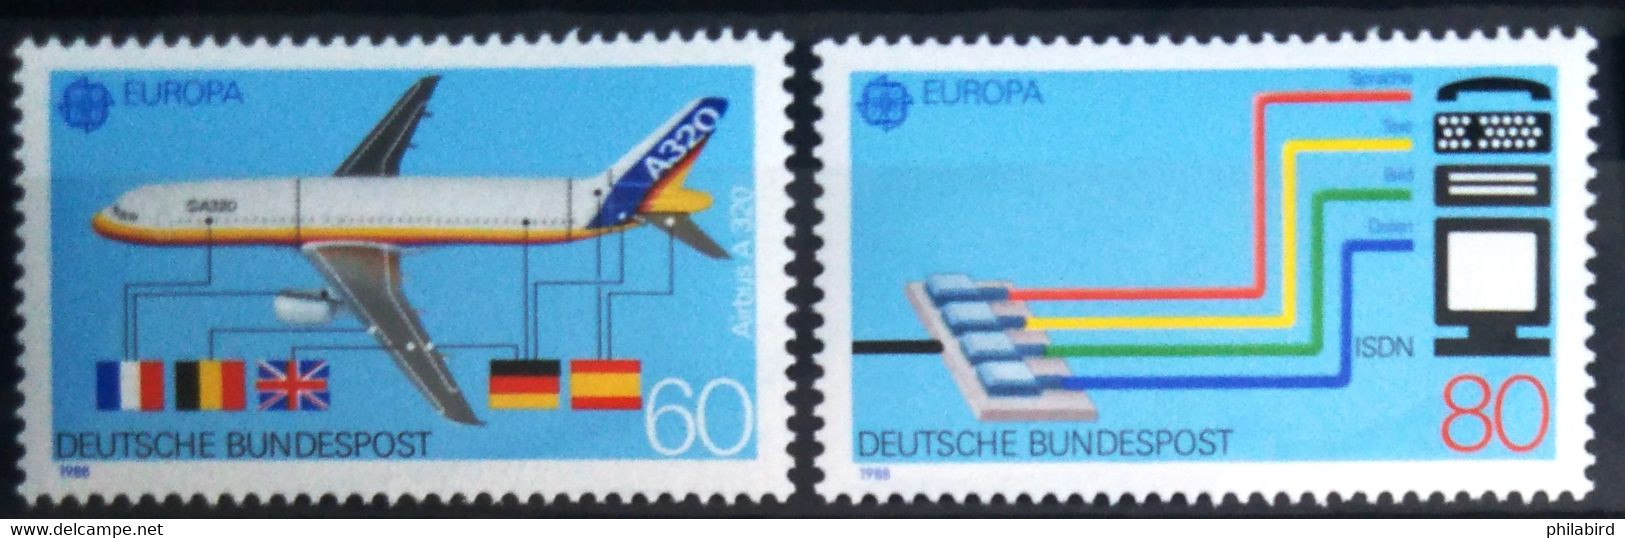 EUROPA 1988 - ALLEMAGNE                 N° 1199/1200                        NEUF** - 1988